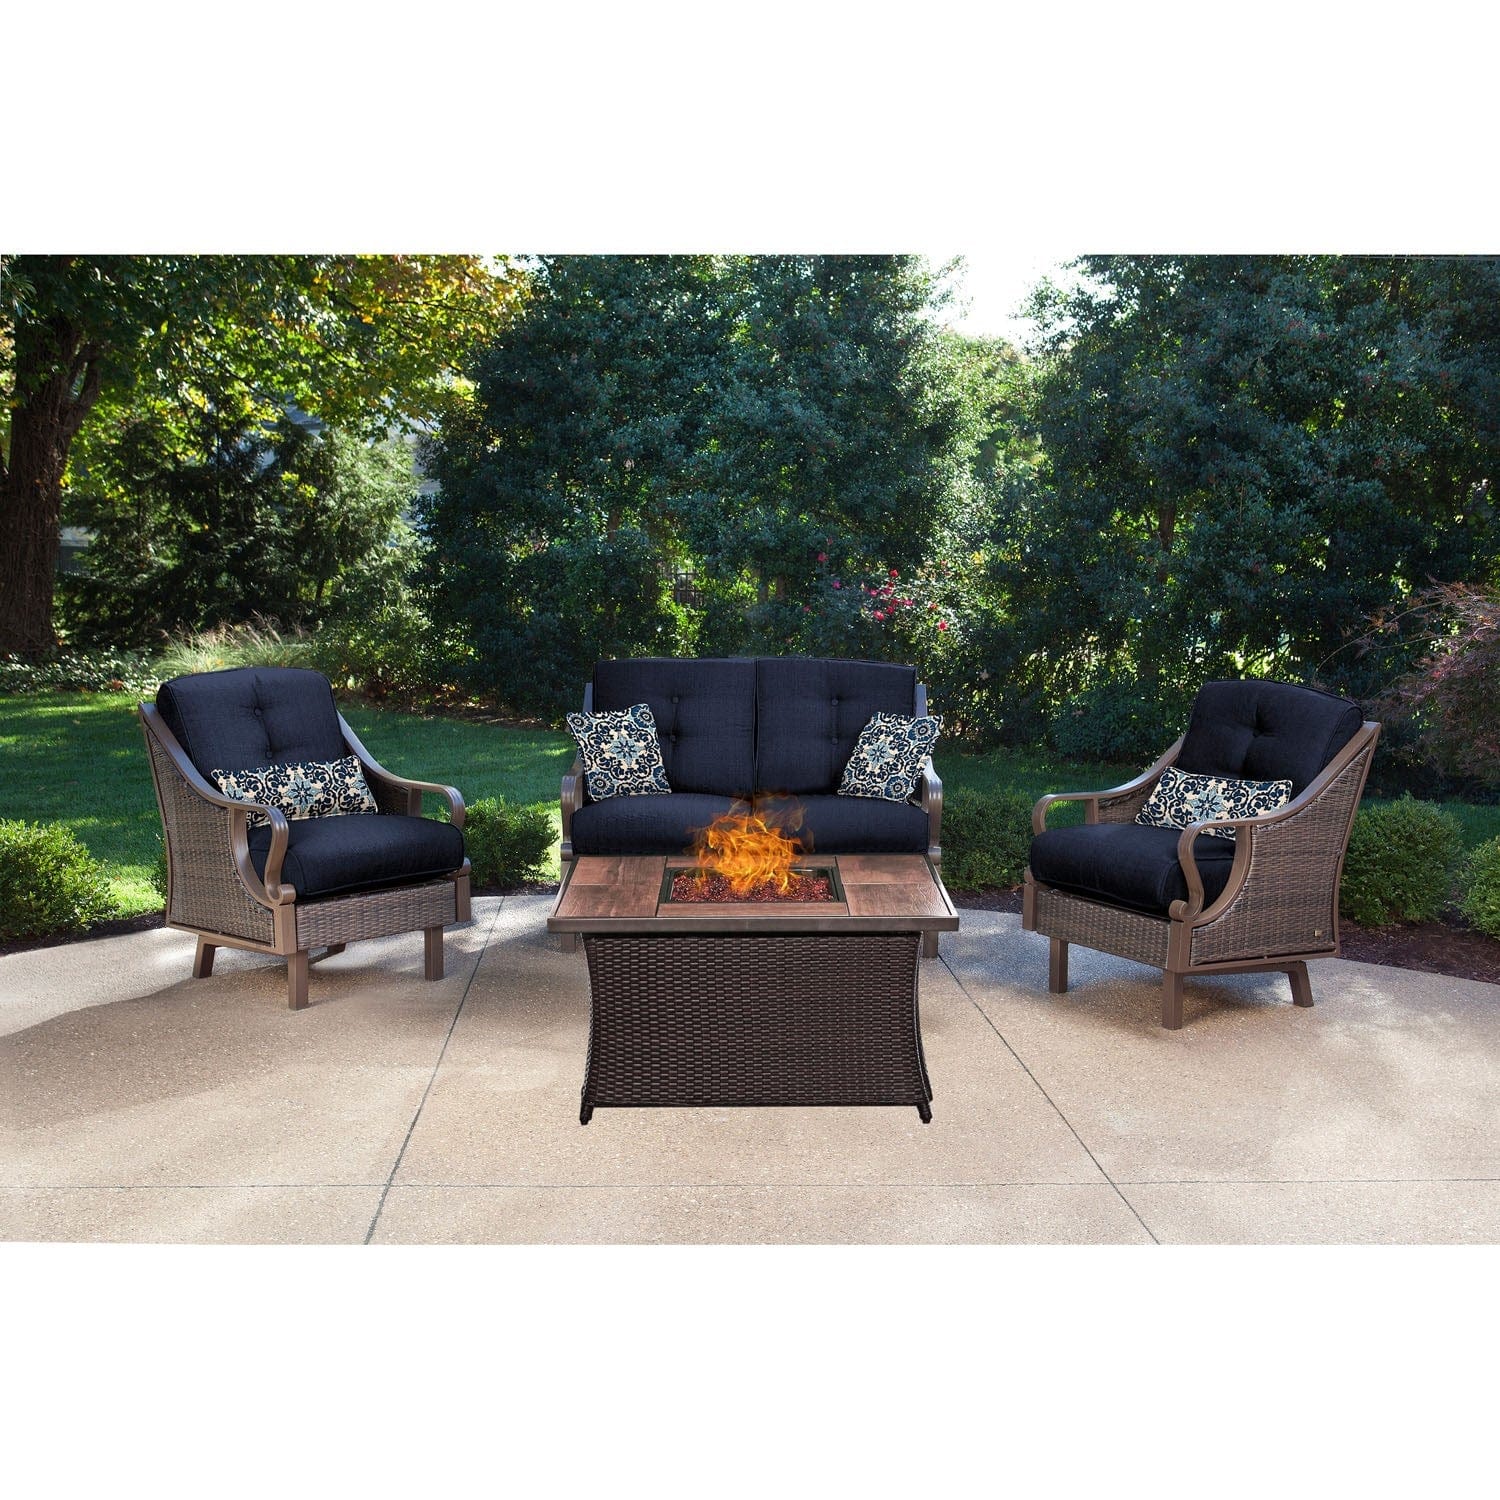 Hanover Fire Pit Chat Set Hanover - Ventura 4-Piece Fire Pit Chat Set | with Wood Grain Tile Top | Brown/Navy | VEN4PCFP-NVY-WG